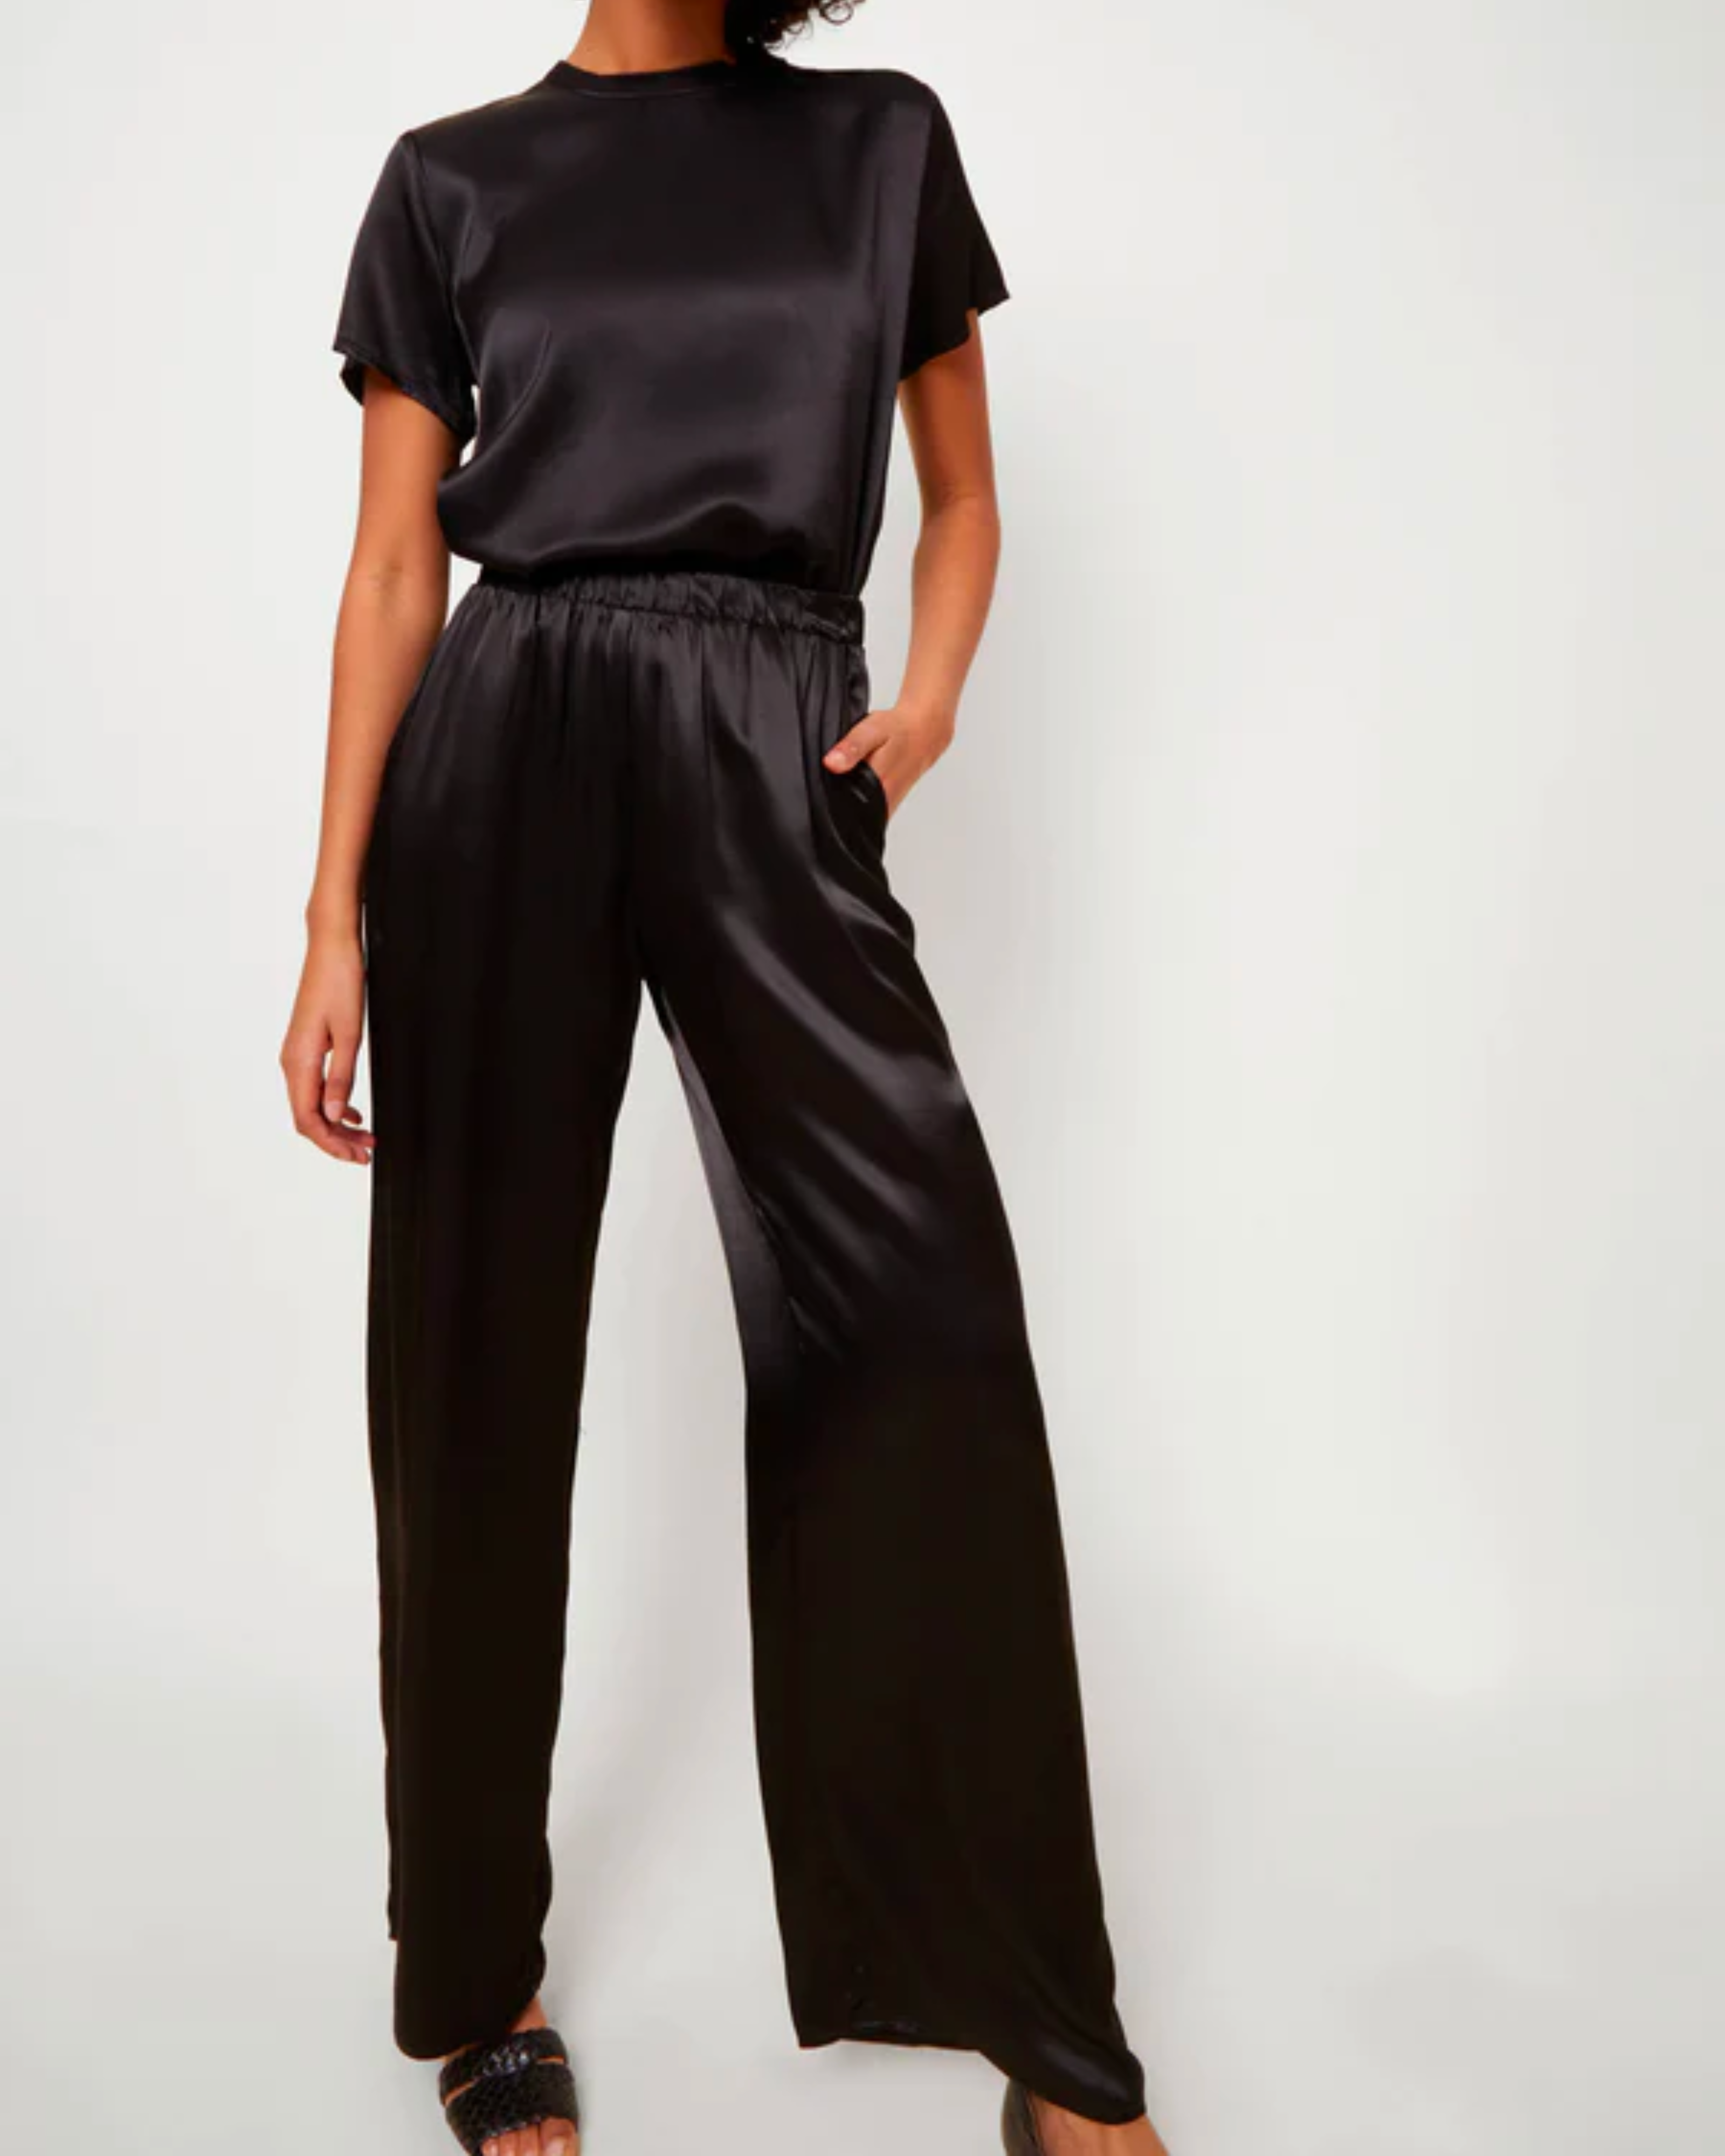 Nation Riviera Straight Leg Pull on Pant in Black